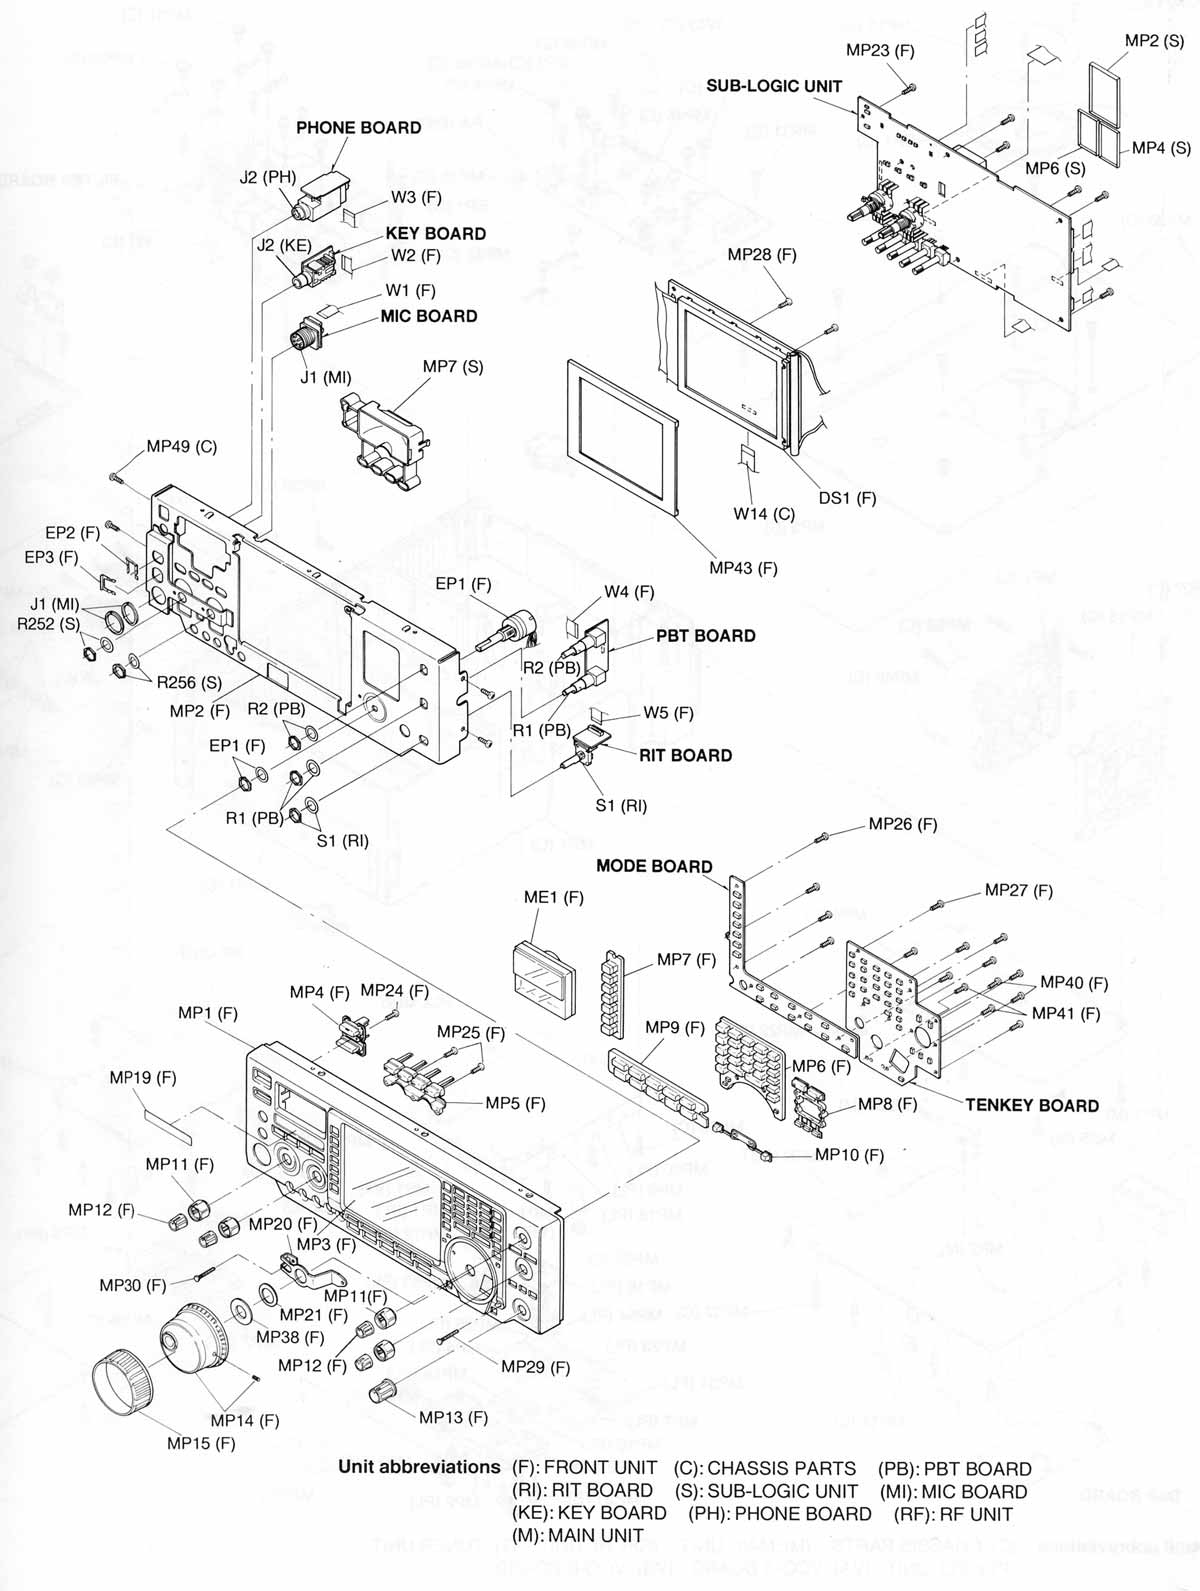 IC-756 front panel exploded view (Service manual, p. 7-2)